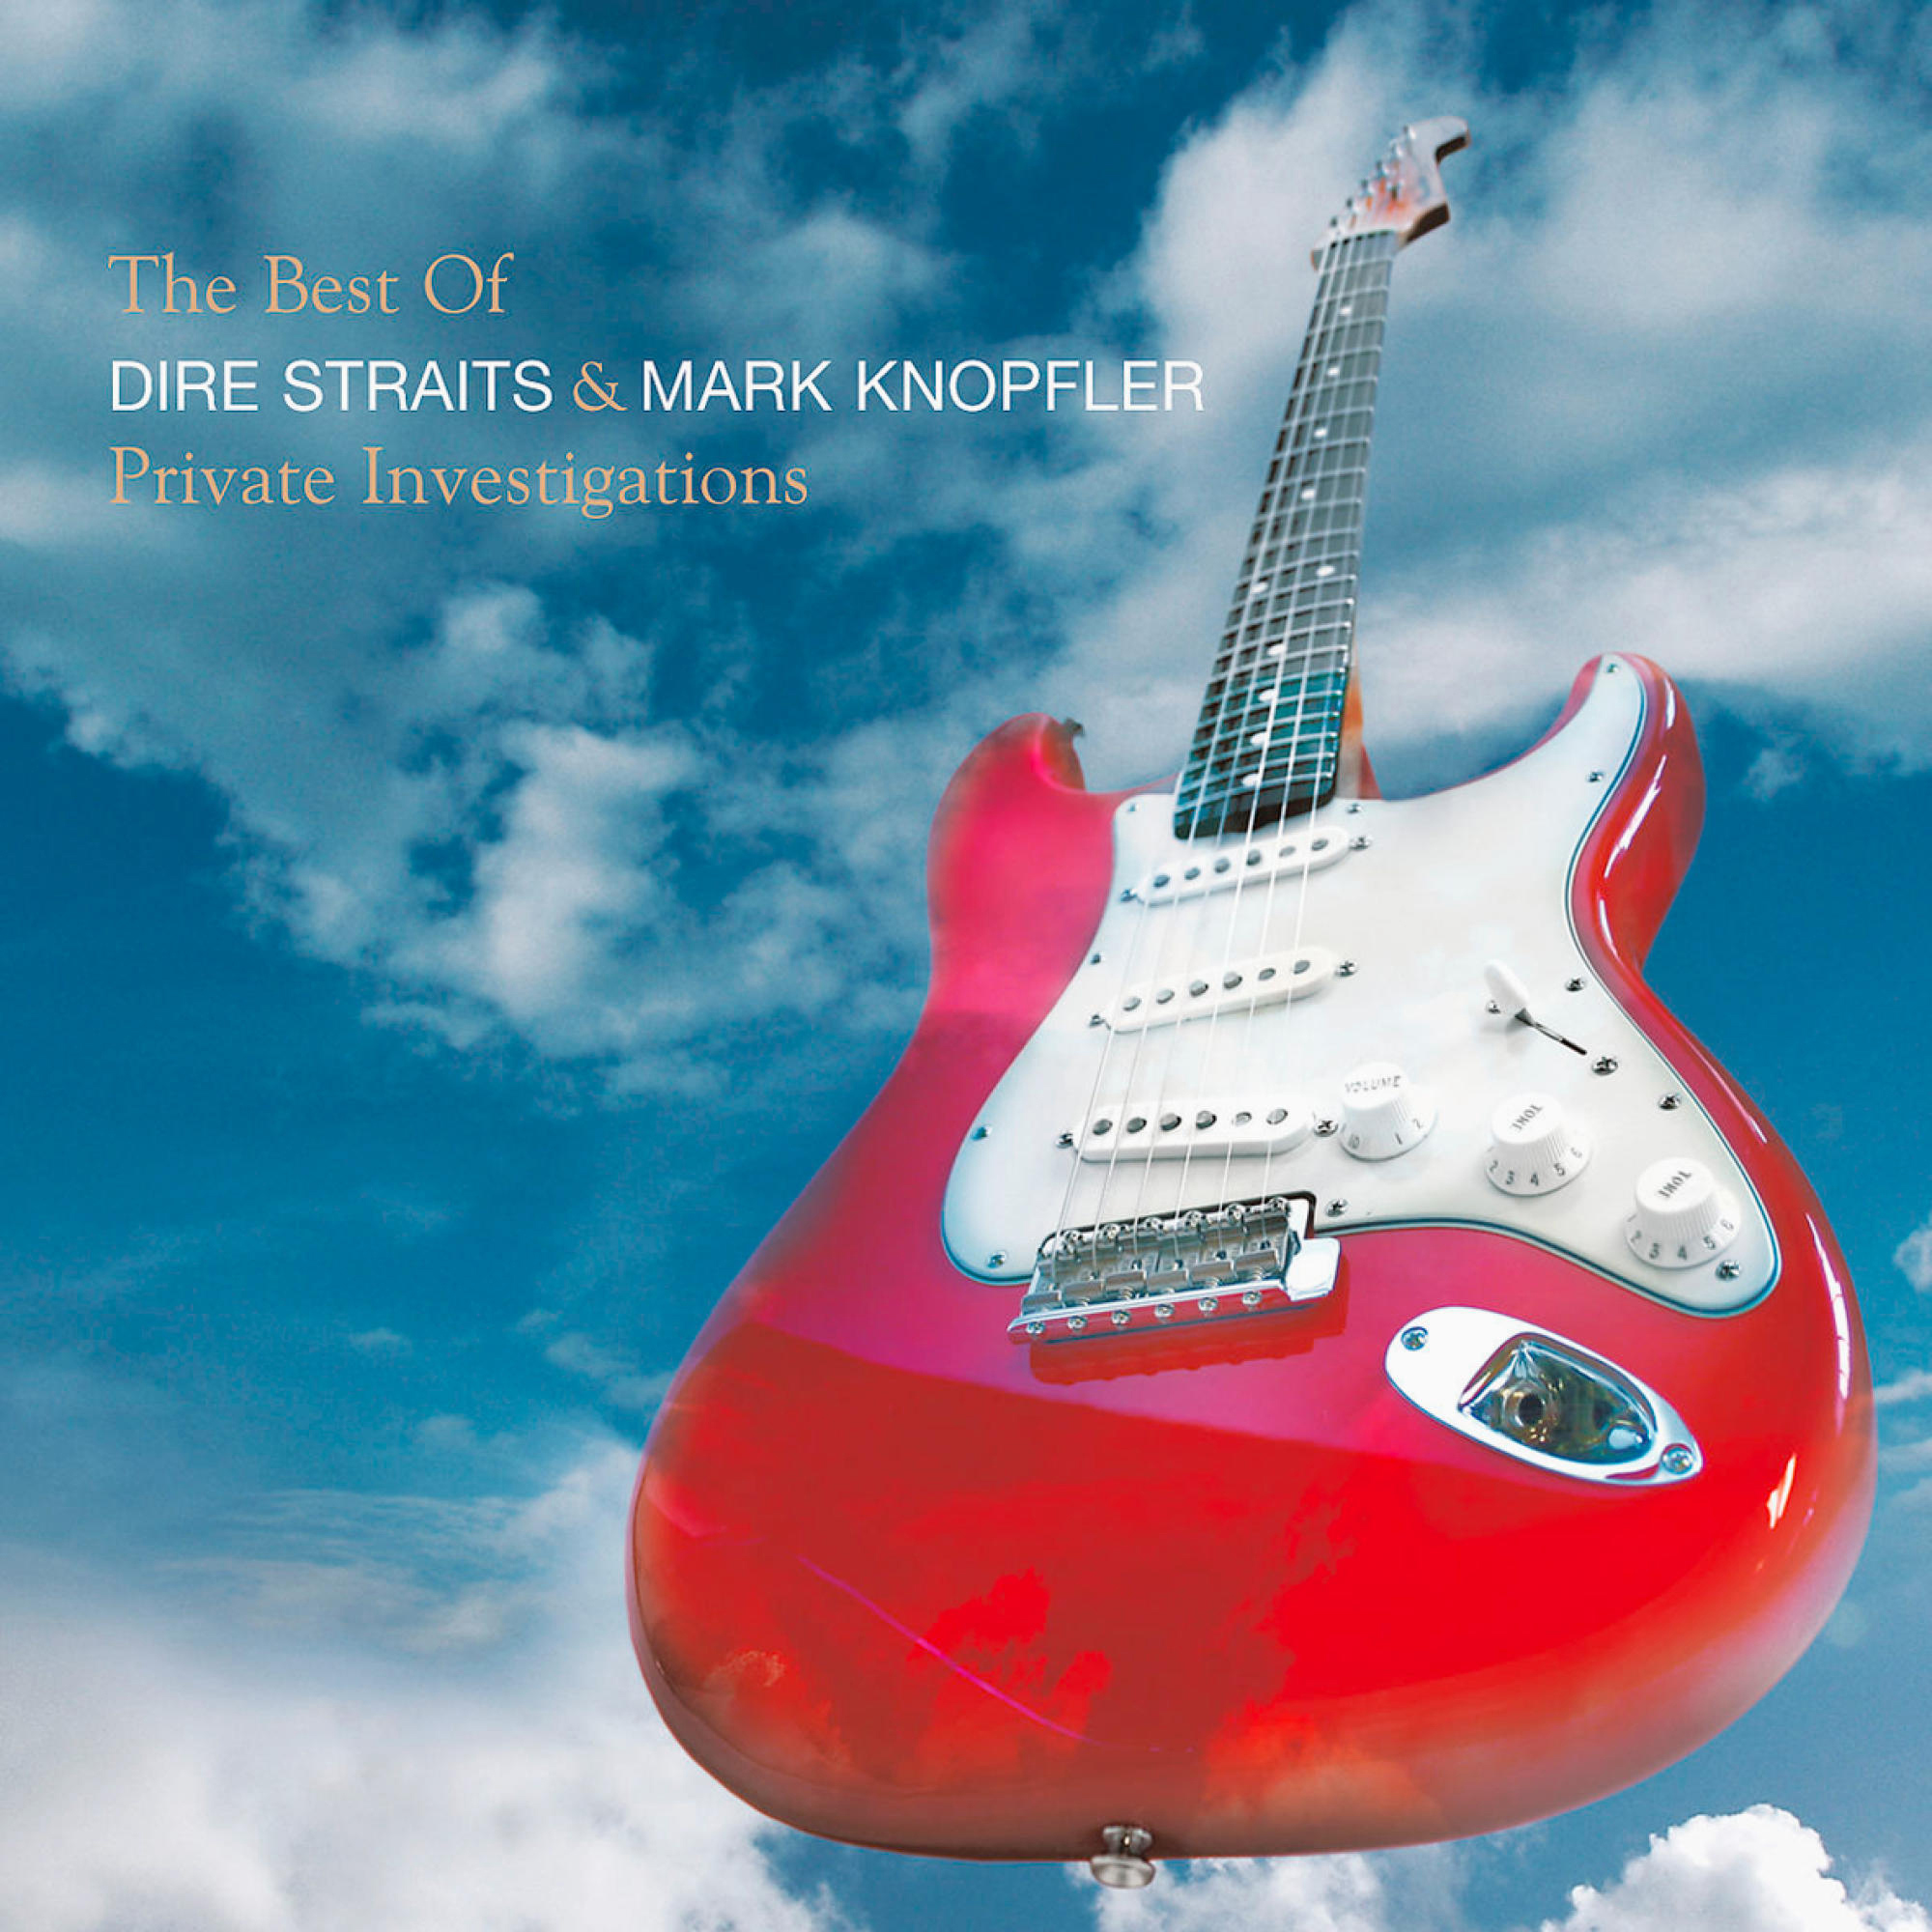 Knopfler Straits, - (CD) Dire - Of Mark Private - Best Investigations